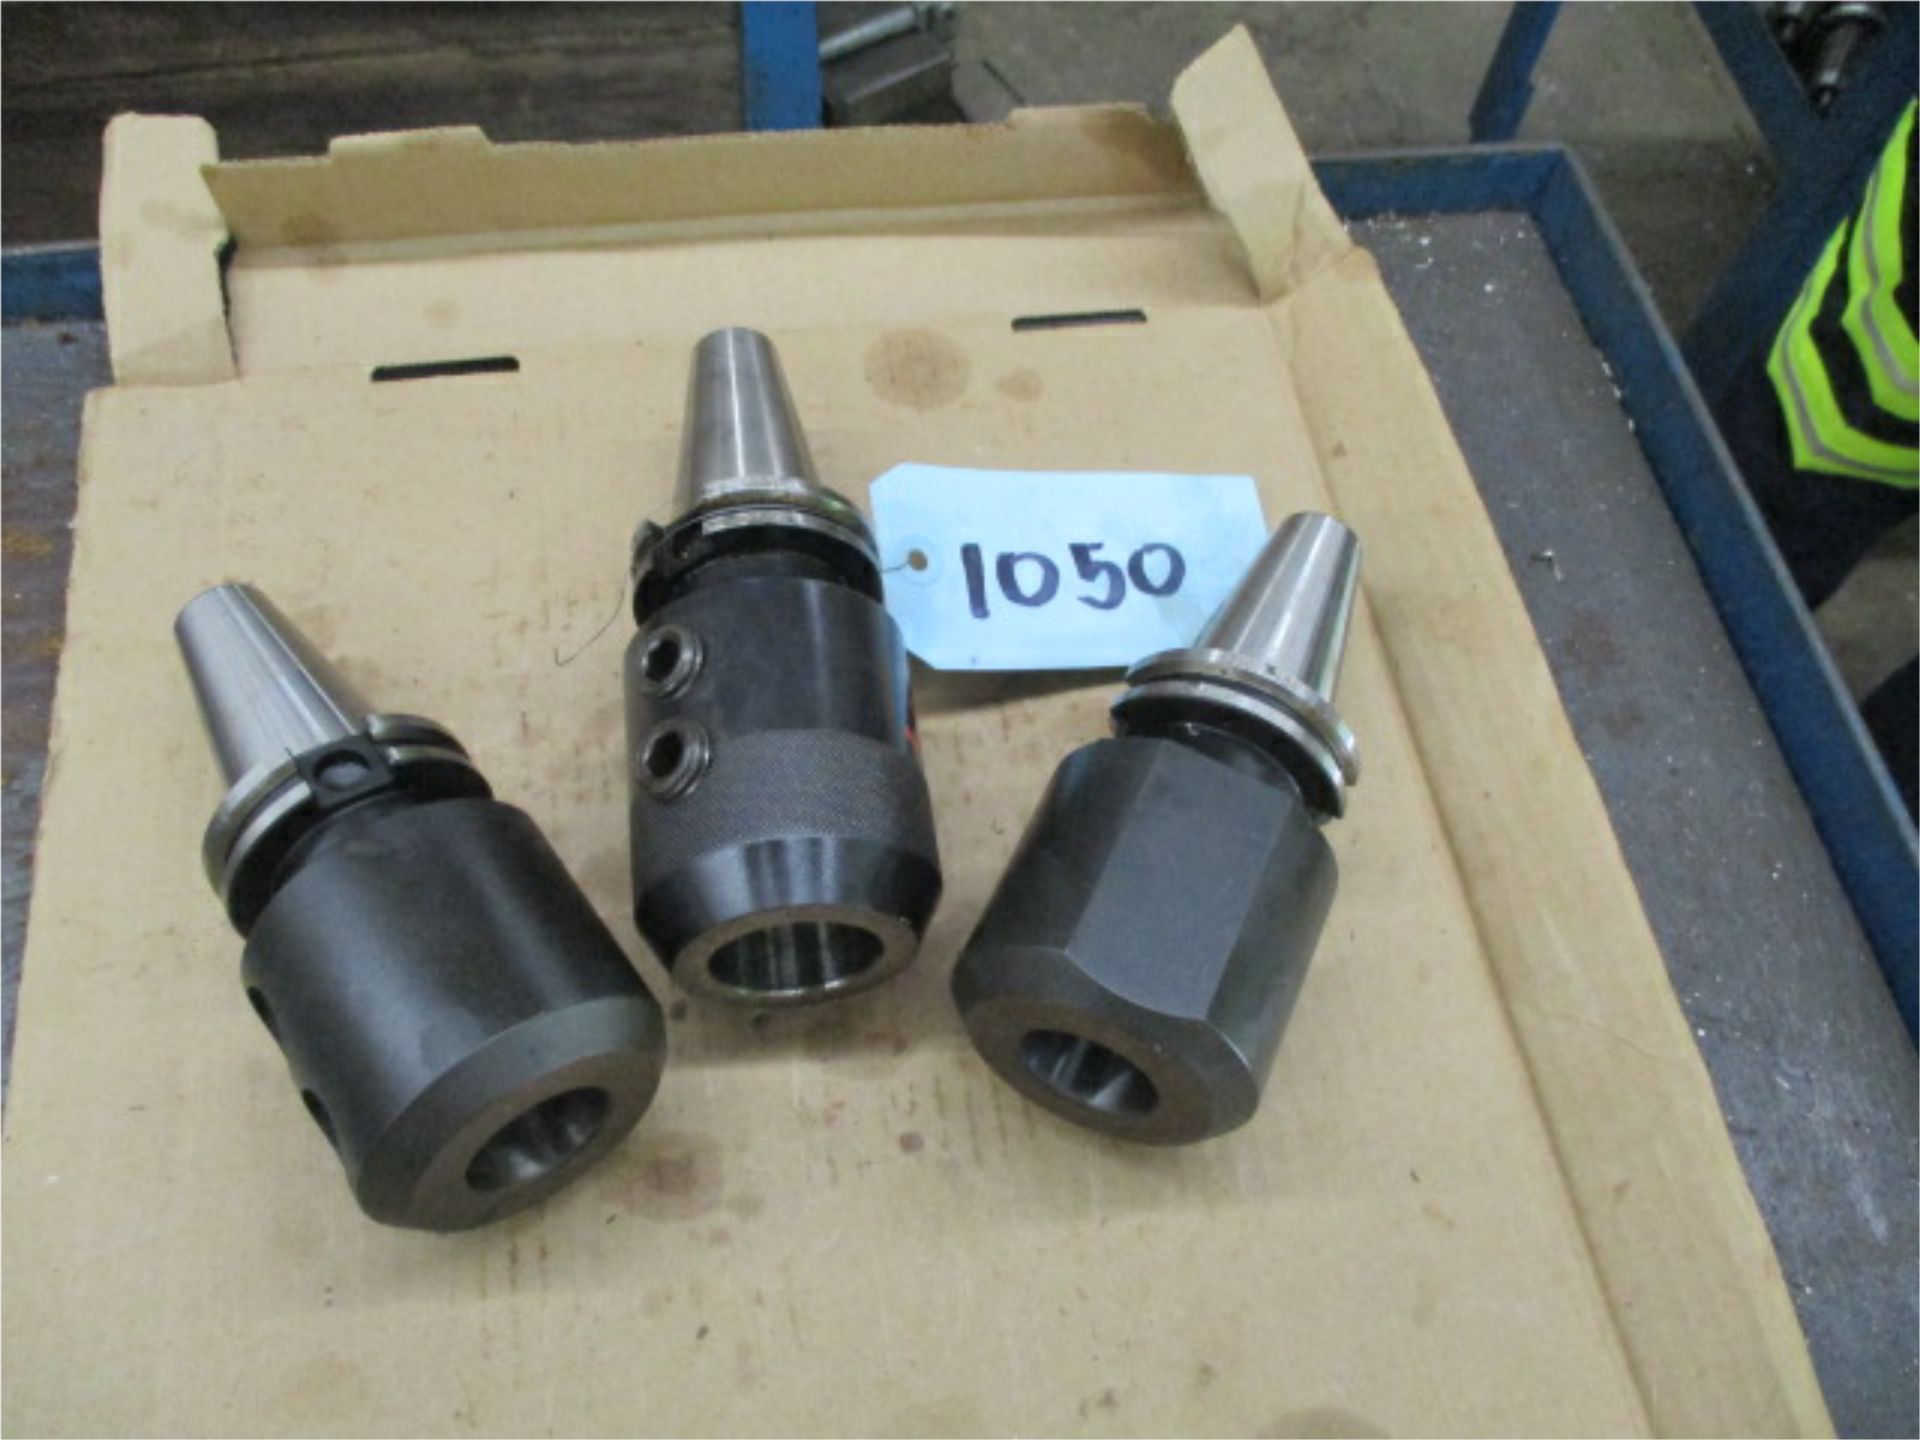 40 Taper End Mill Holders, 3 pcs., large